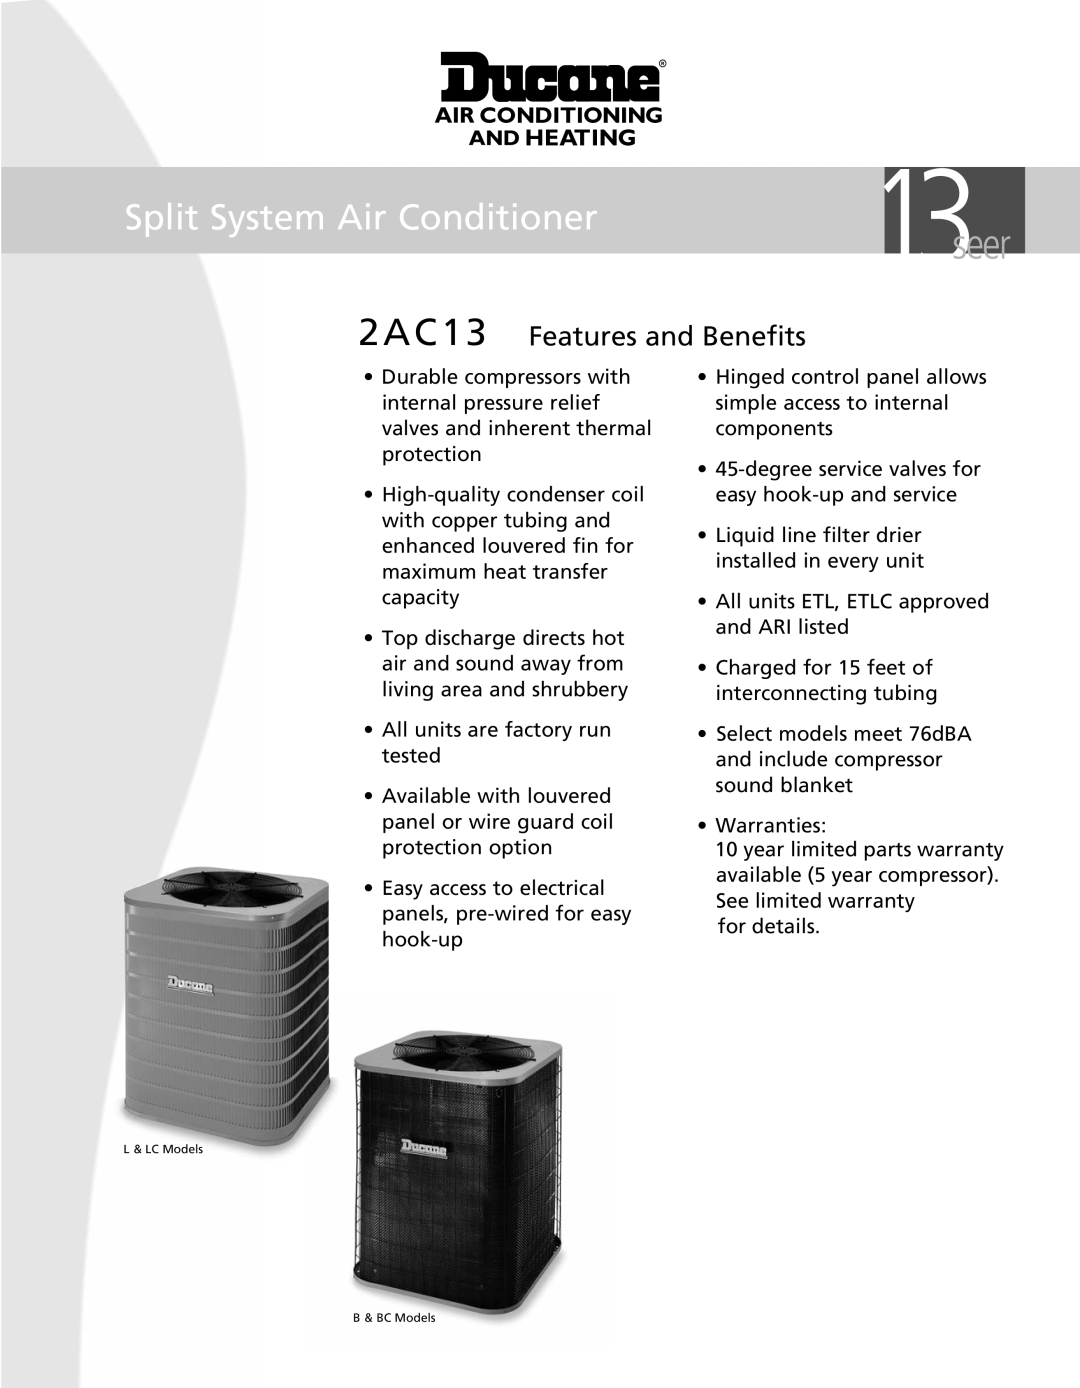 Ducane (HVAC) warranty seer, Split System Air Conditioner, 2AC13 Features and Benefits 